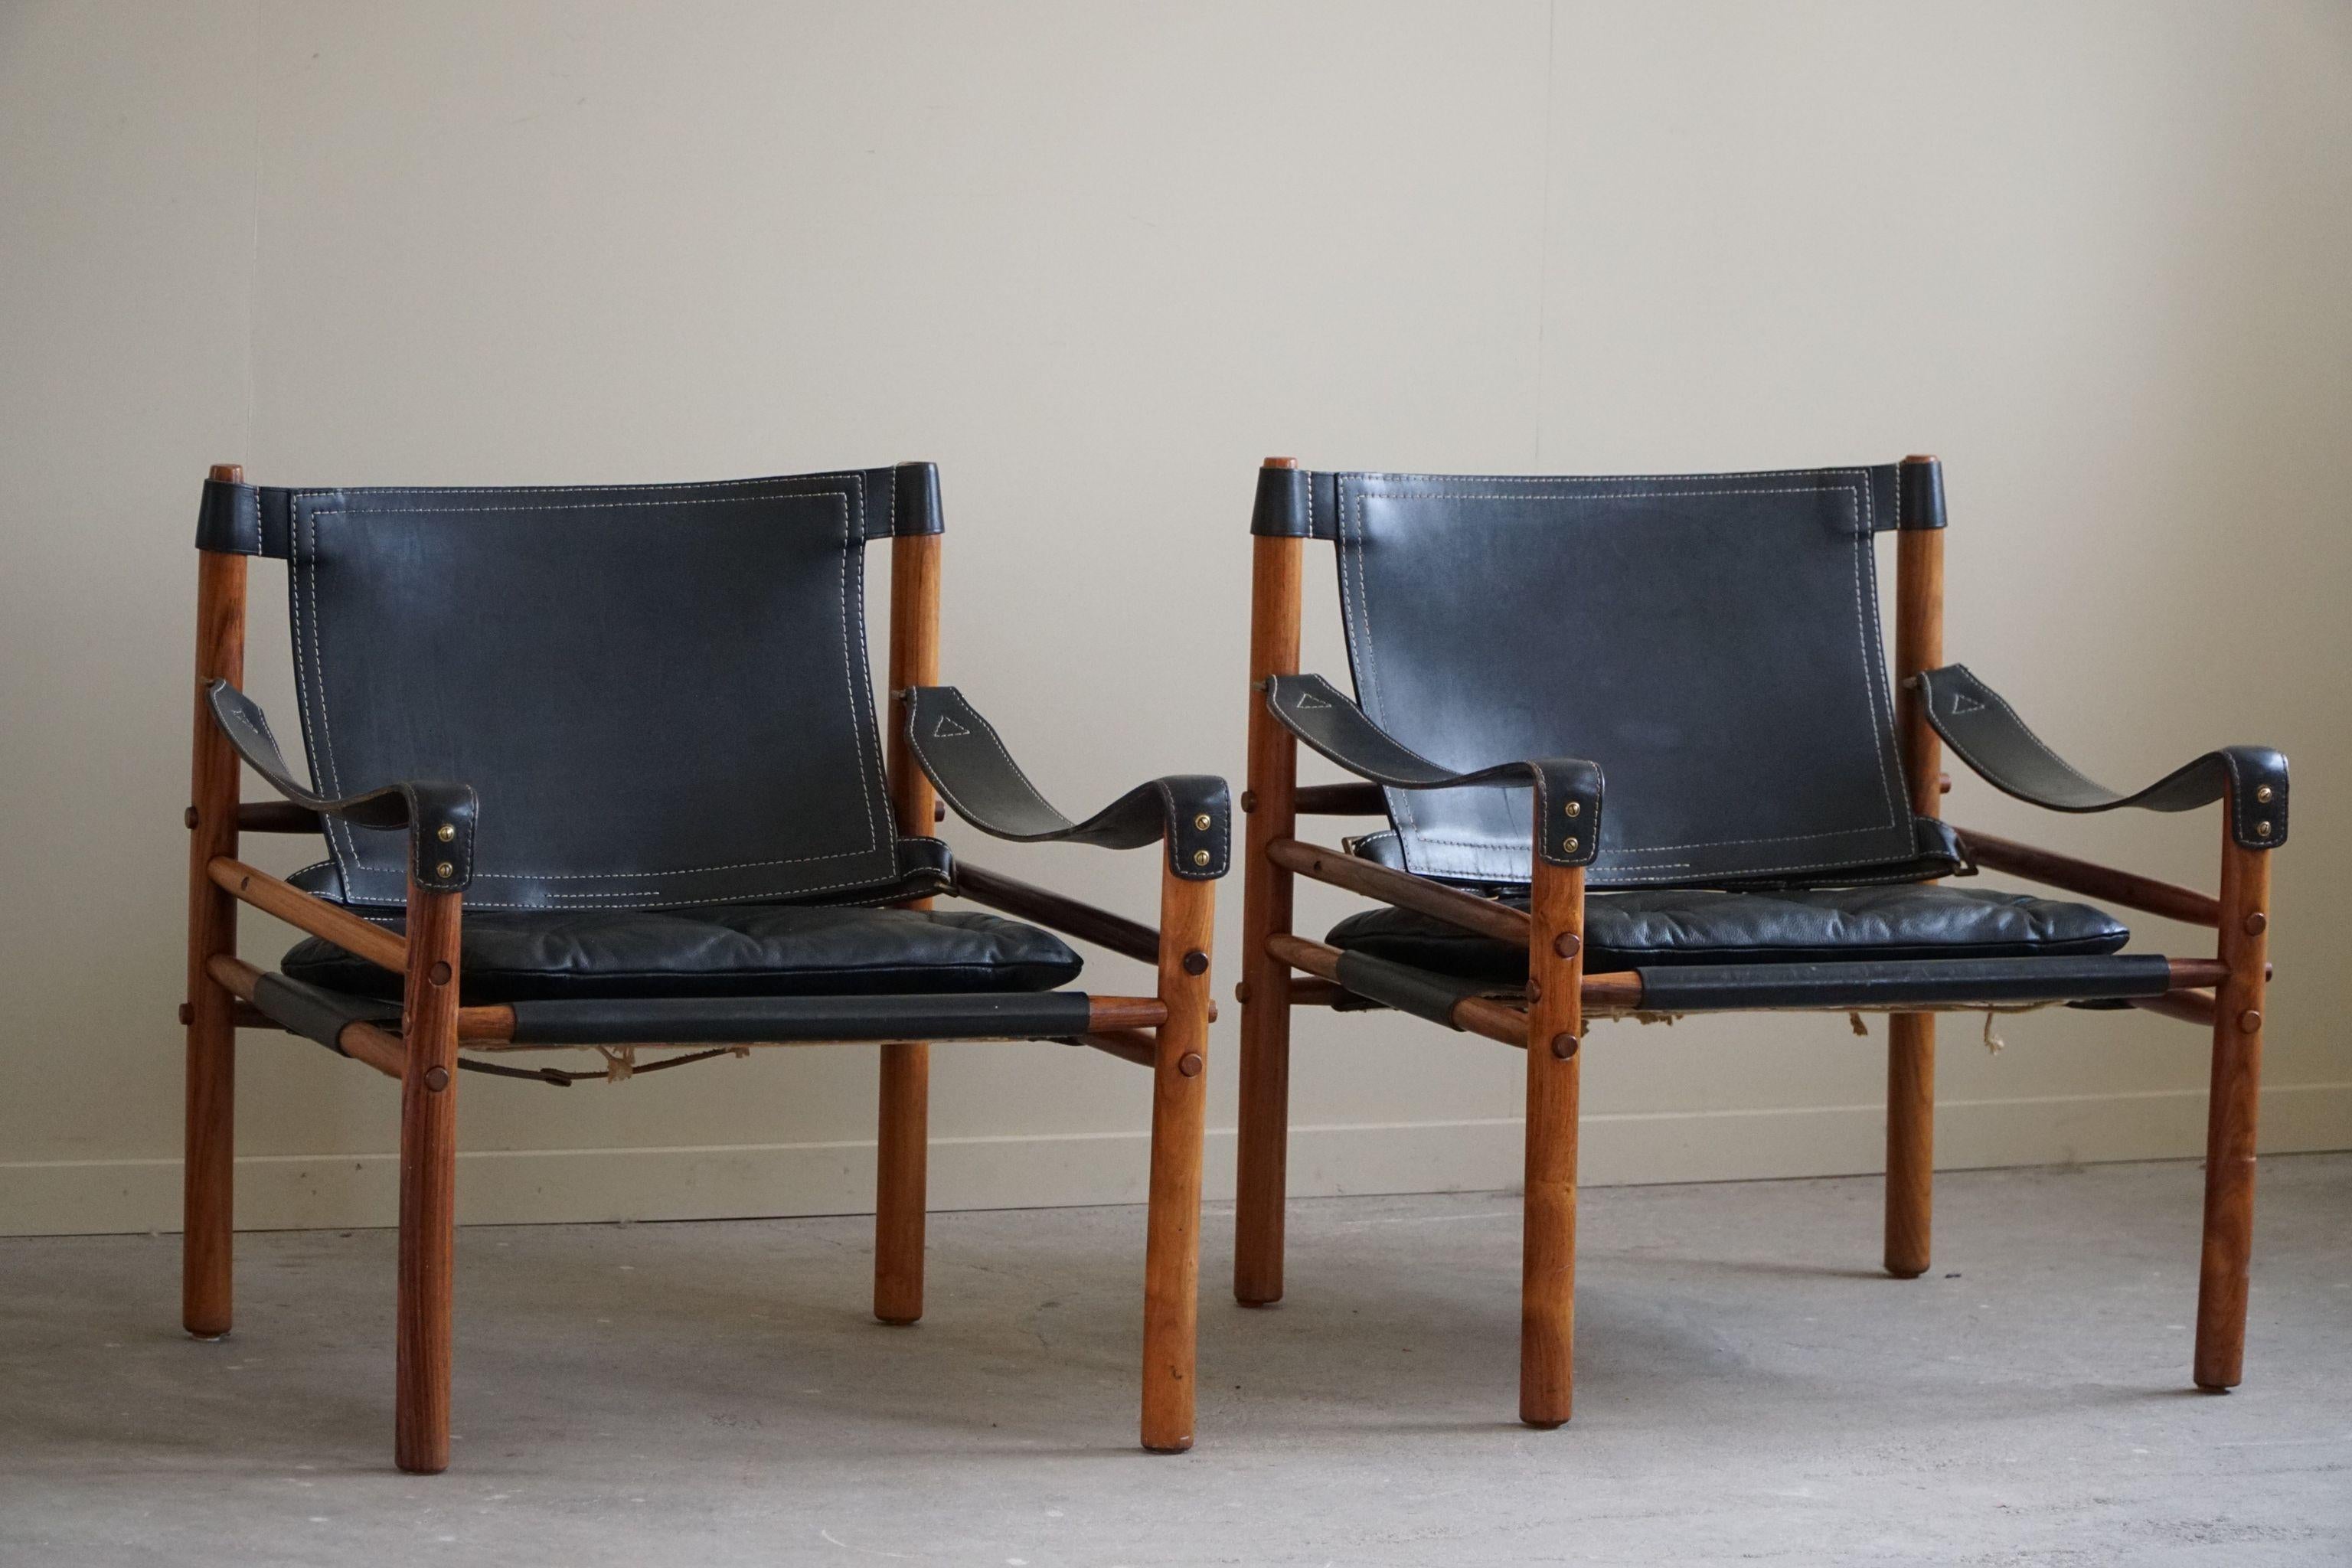 Pair of Sirocco Lounge Chairs in Rosewood, Arne Norell, Ab Aneby, 1960s For Sale 12